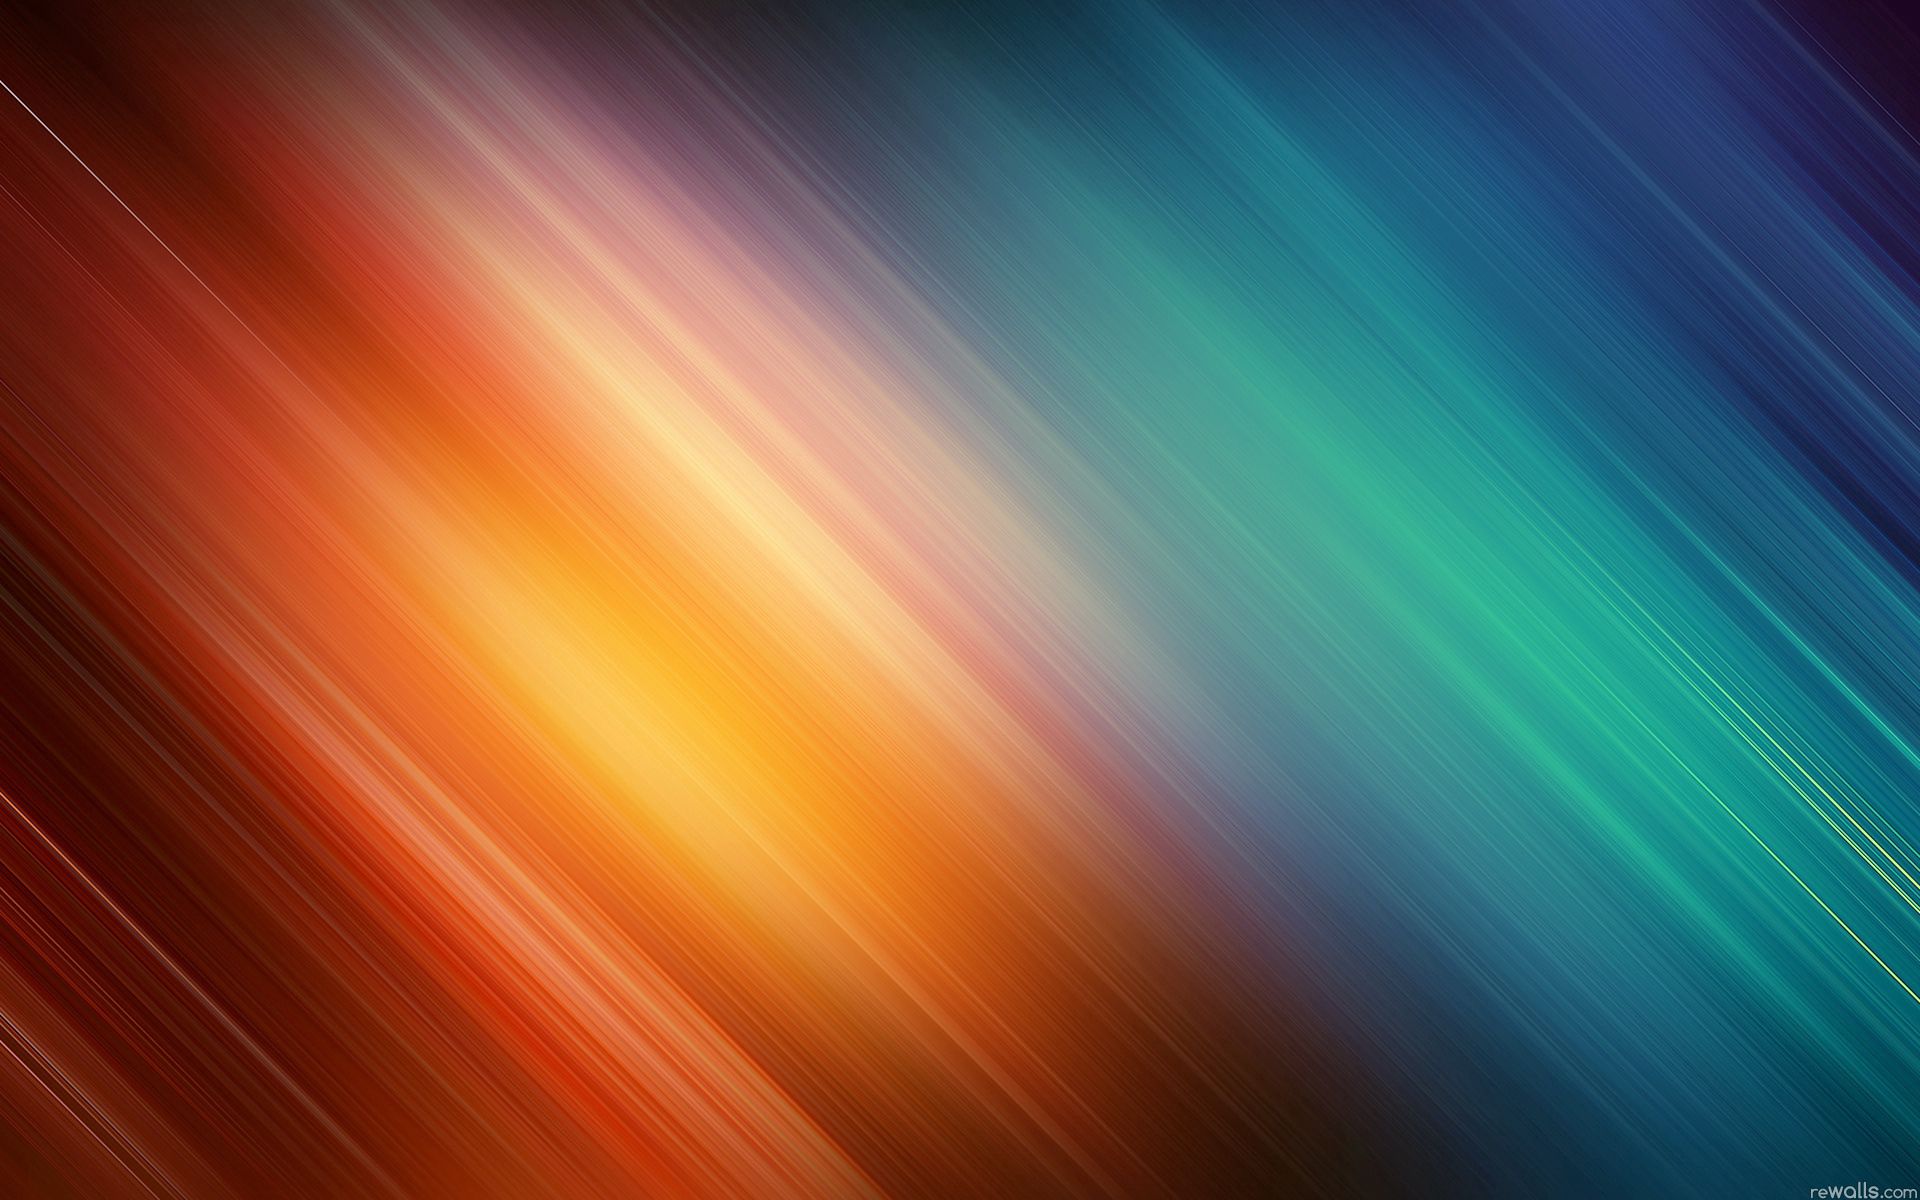 130694 free wallpaper 240x320 for phone, download images obliquely, abstract, shine, lines 240x320 for mobile